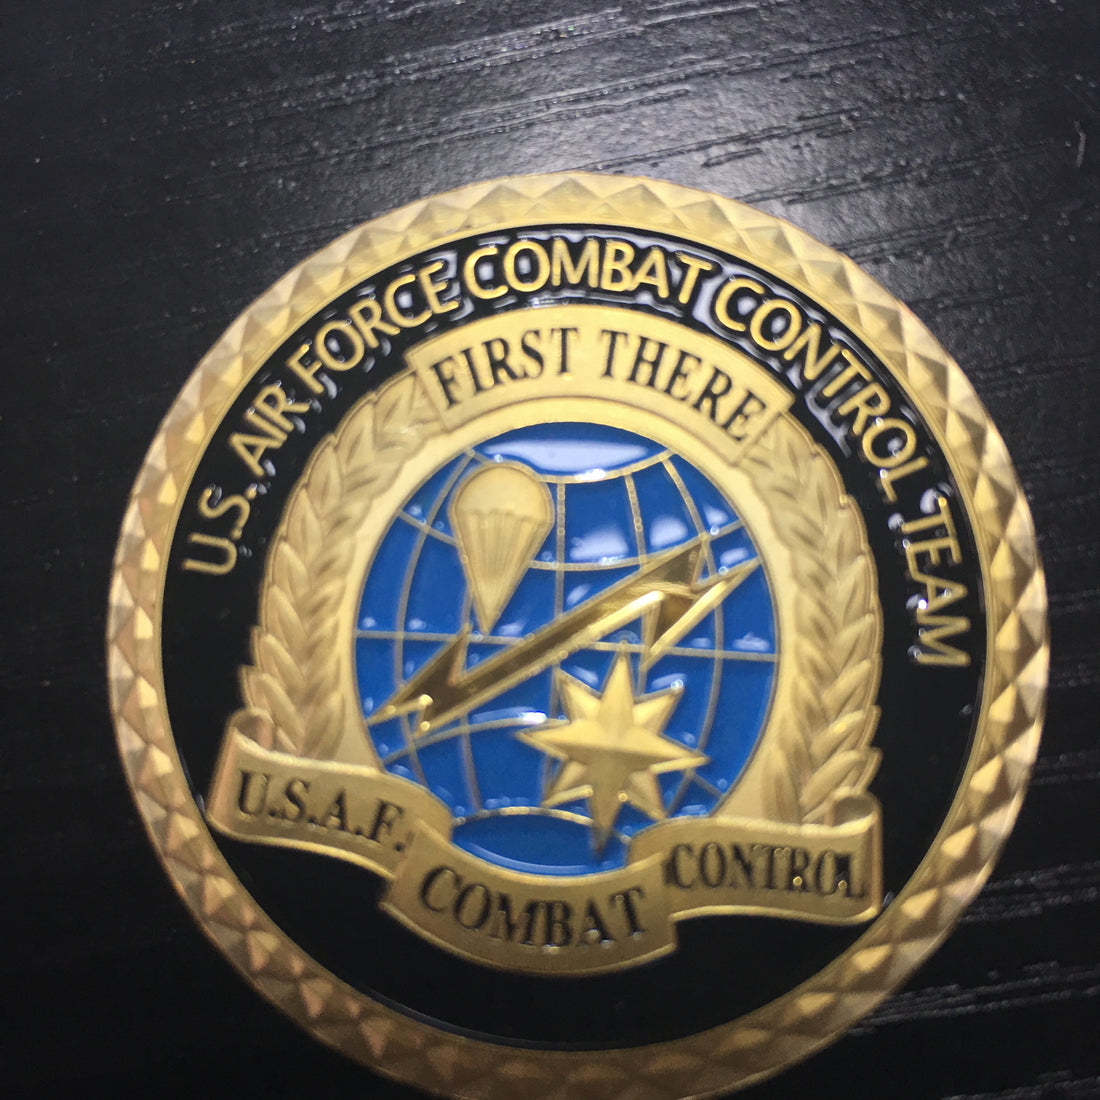 US Air Force Combat Control Team Challenge coin